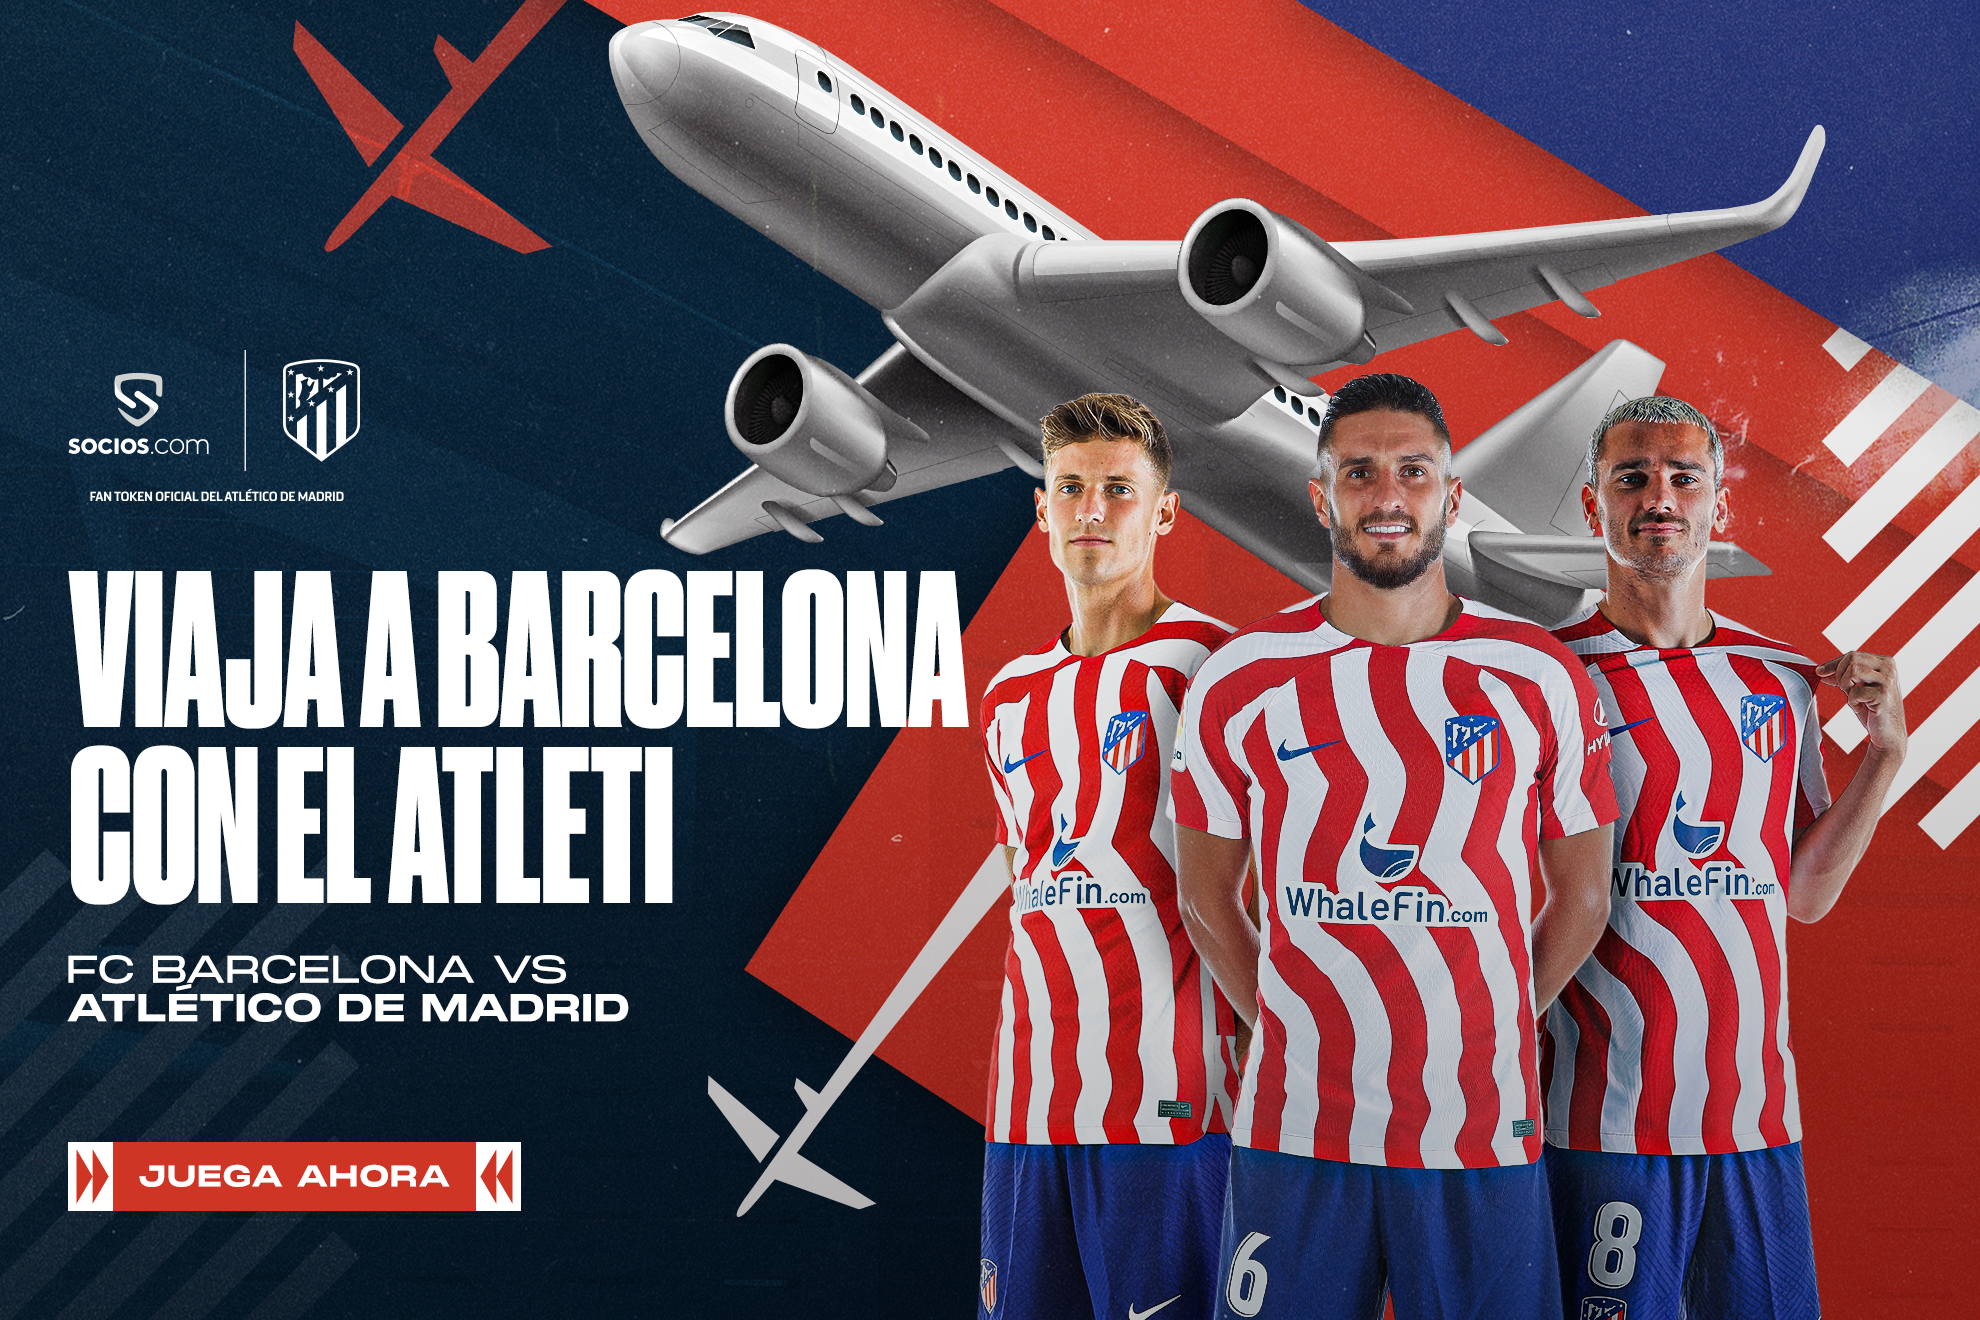 Fly with the team: Fan token holders have the chance to travel with Atletico to Barcelona